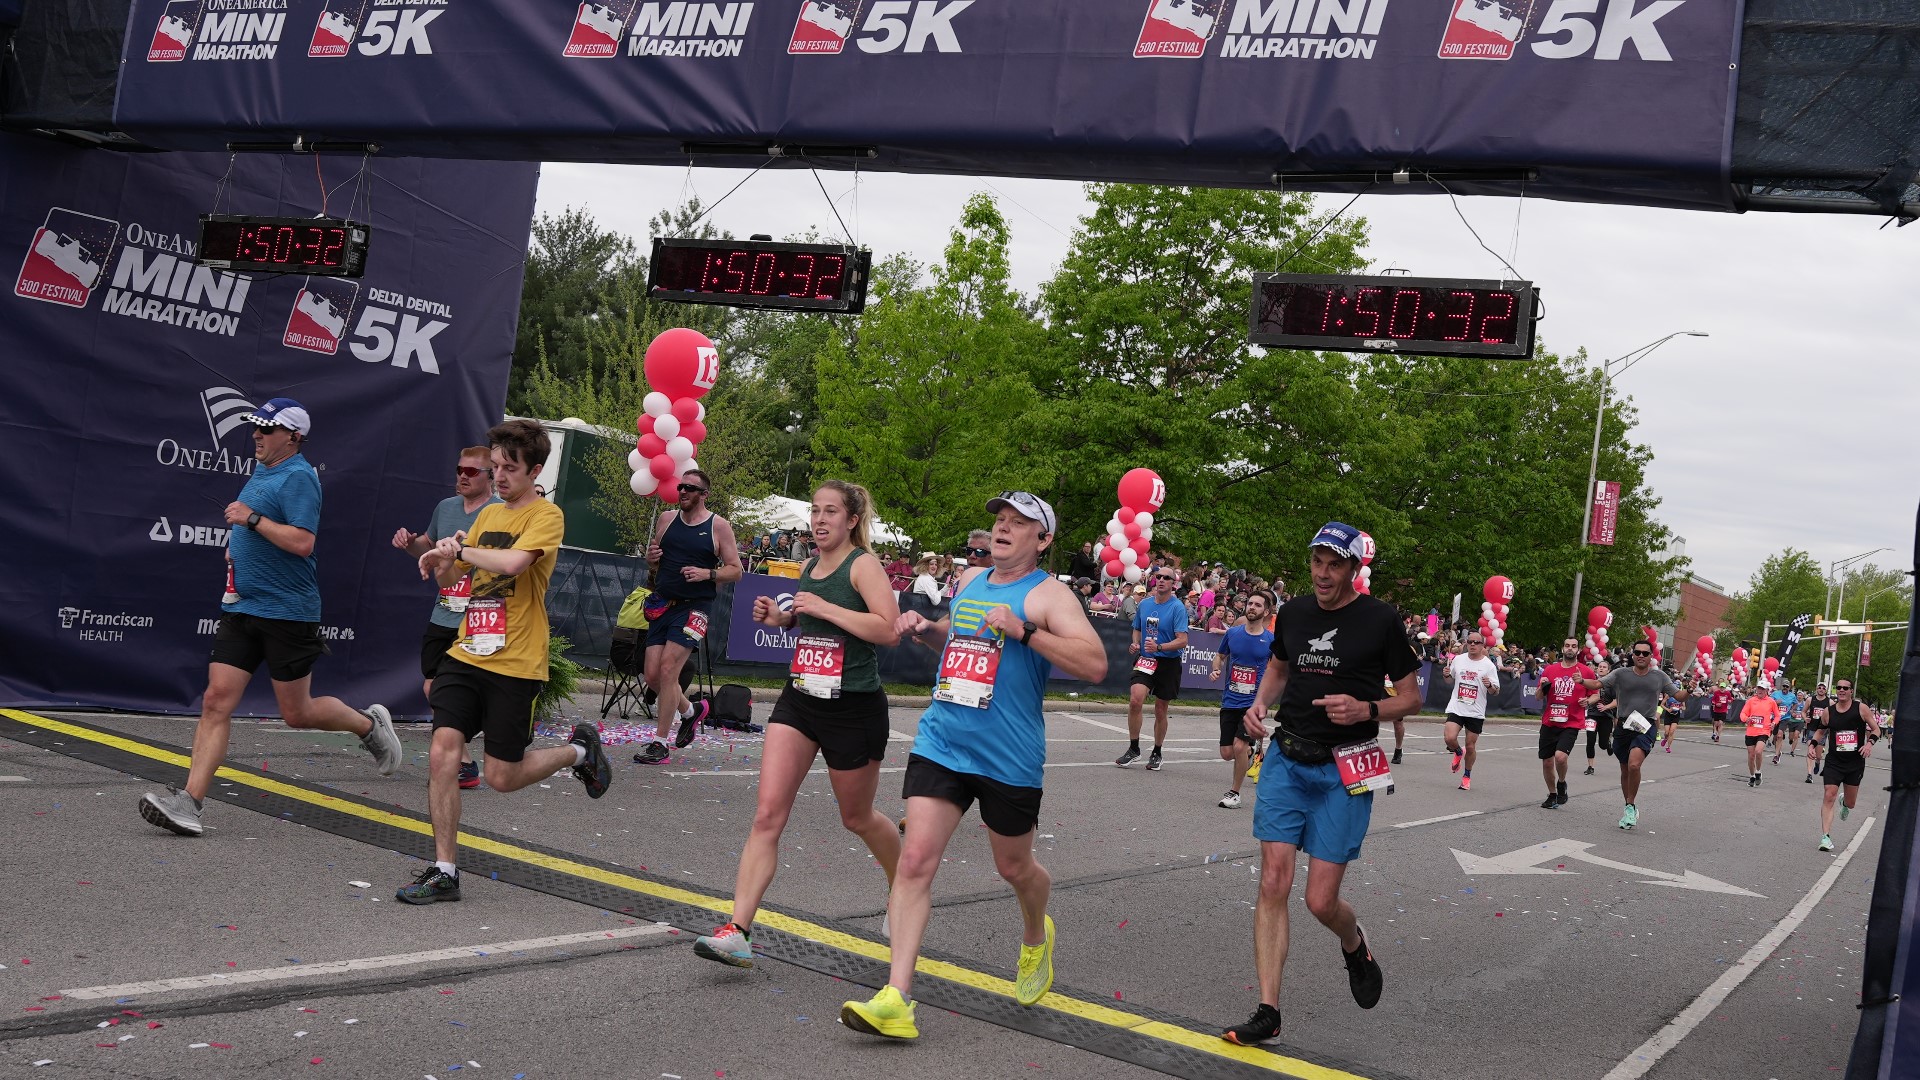 From finding inspiration to overcoming health battles, we feature the emotional stories of people finding their place in the 500 Festival Mini-Marathon.